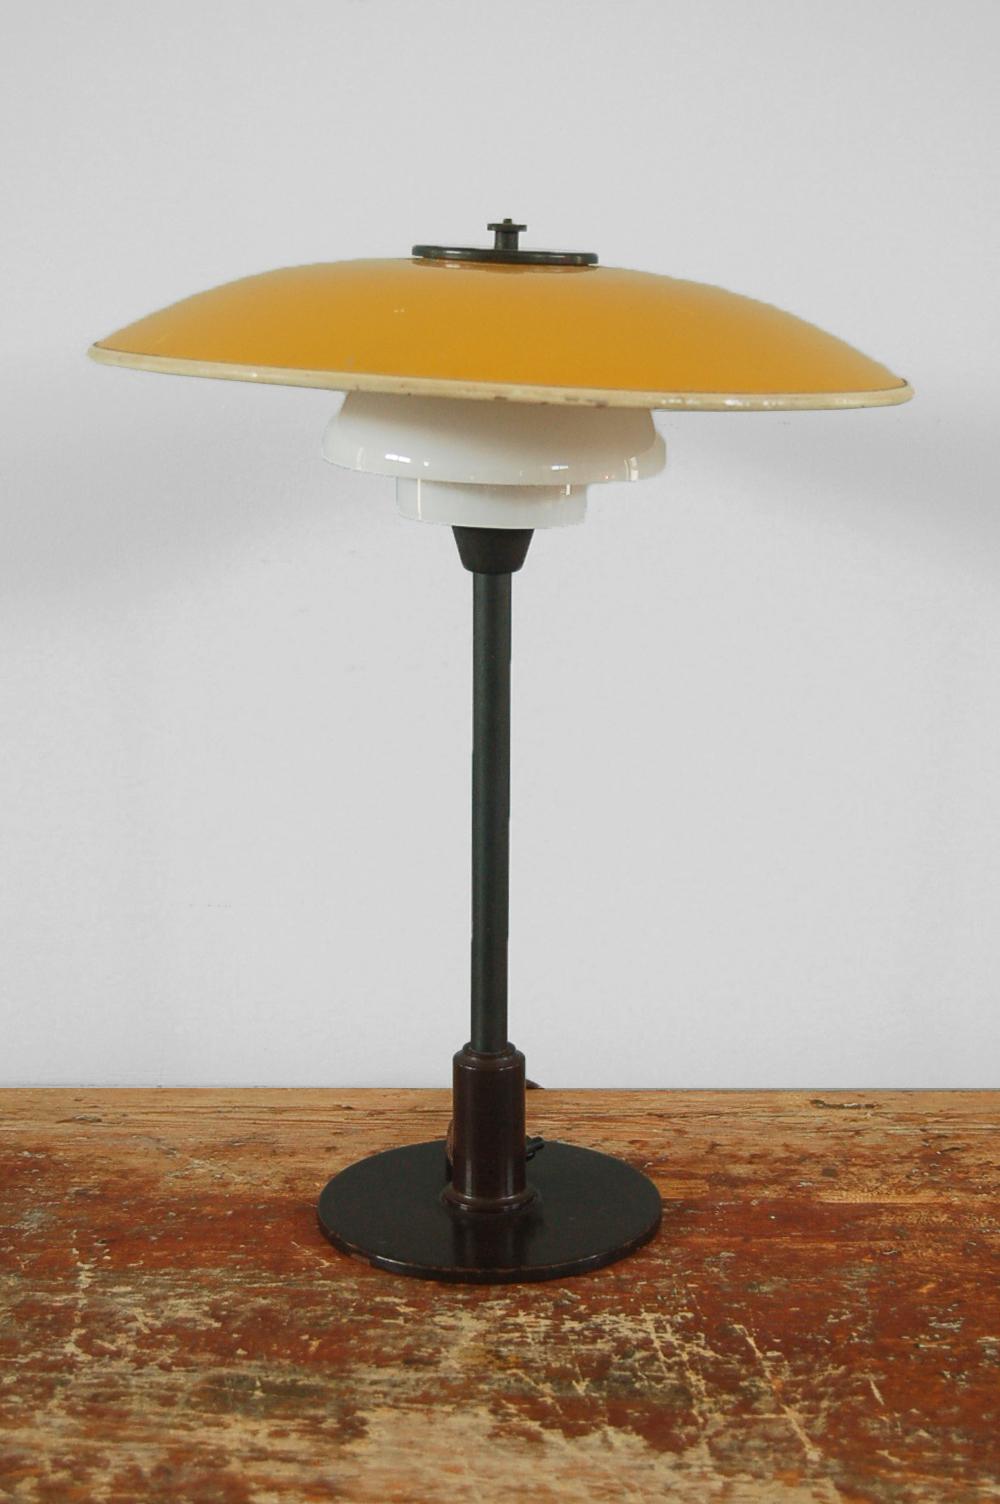 Poul Henningsen (1894 Ordrup, Denmark - Hillerød, Denmark 1967), table light 3/2 yellow or white metal top shade with opal white glass middle and lower shades, patinated metal components, manufactured by Louis Poulsen, Copenhagen, Denmark, origin: